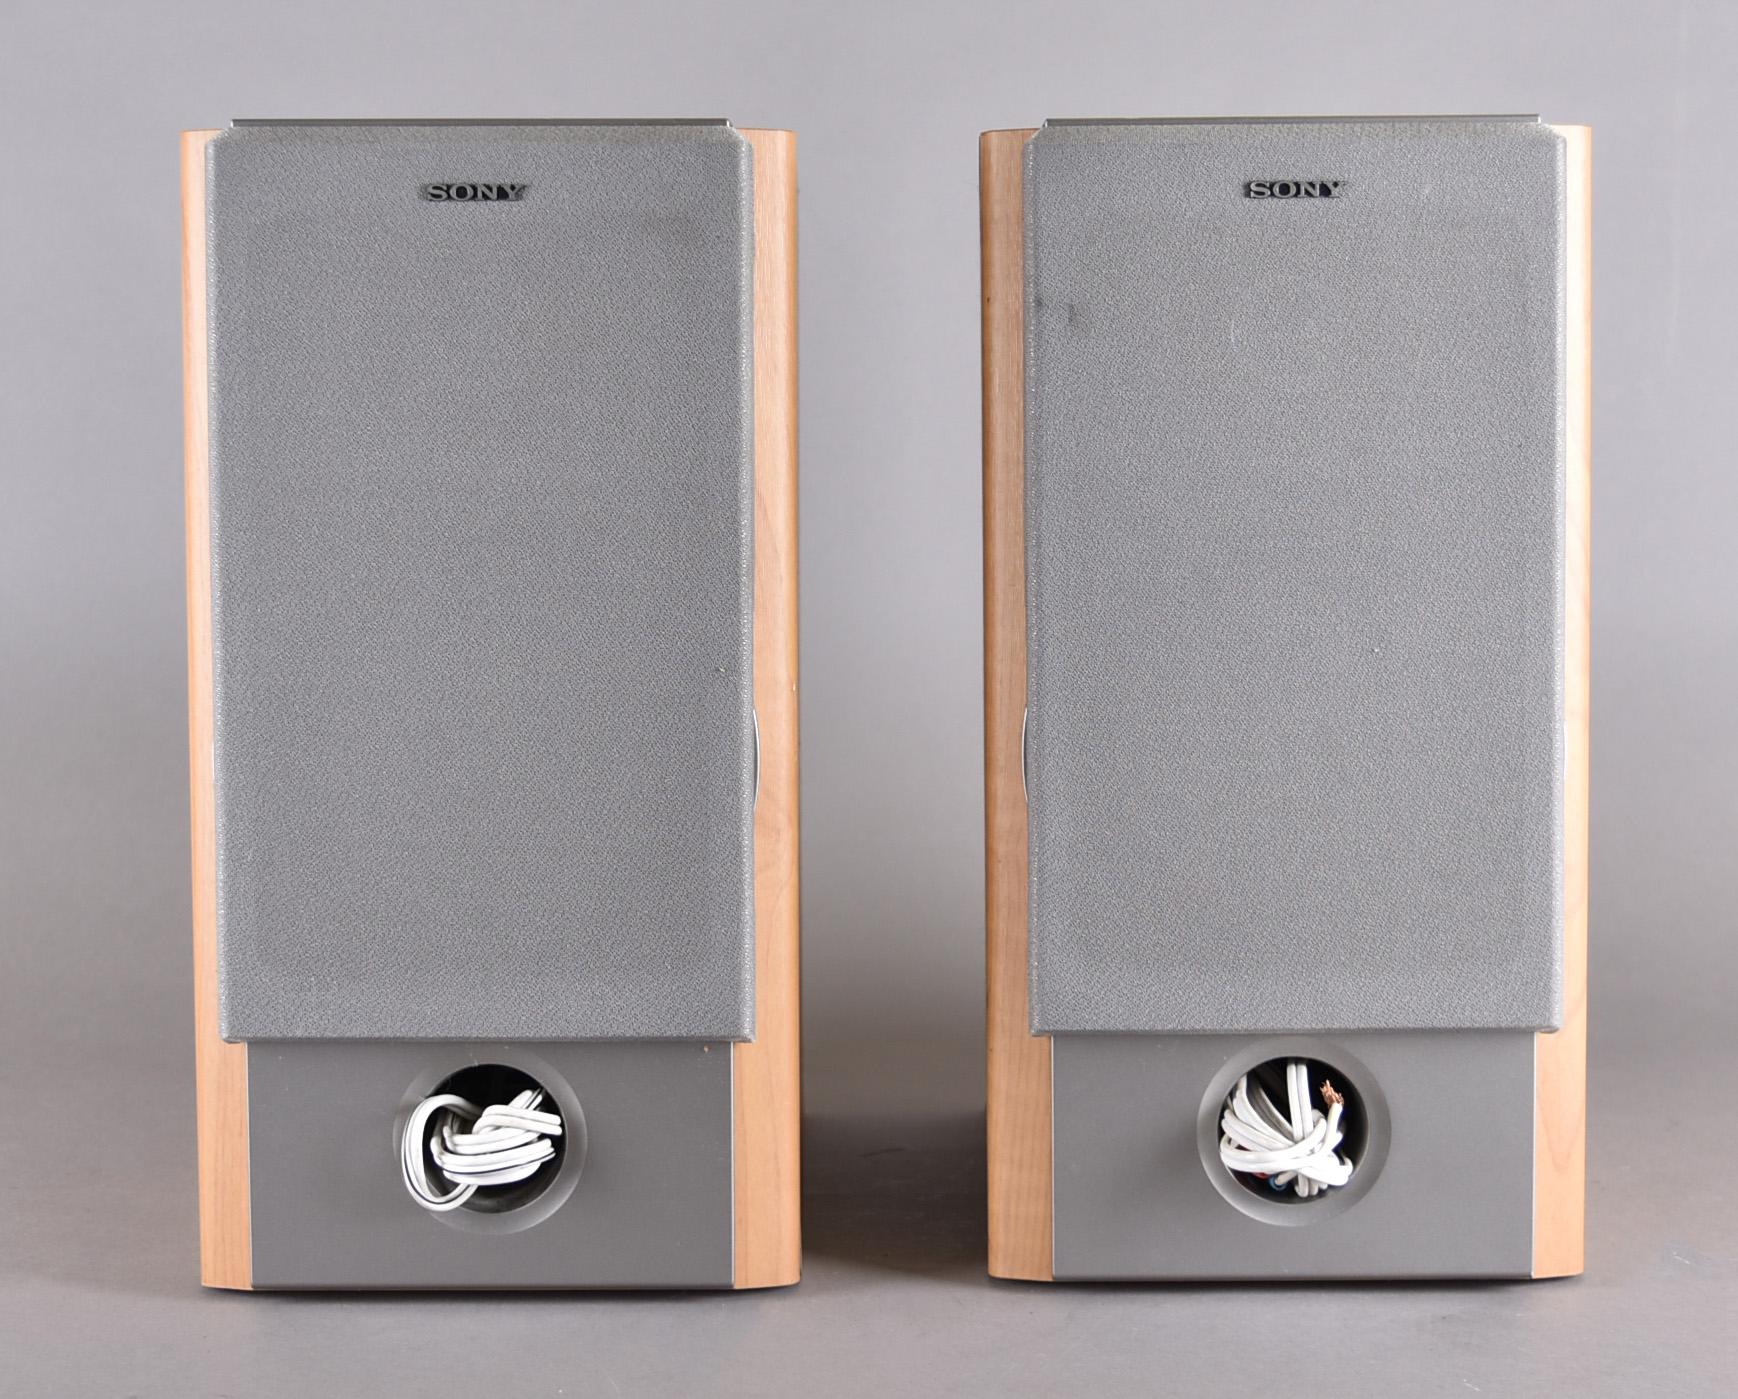 A pair of Sony SS-NX1 speakers, 40 cm high x 29 cm deep x 21 cm wide (2)